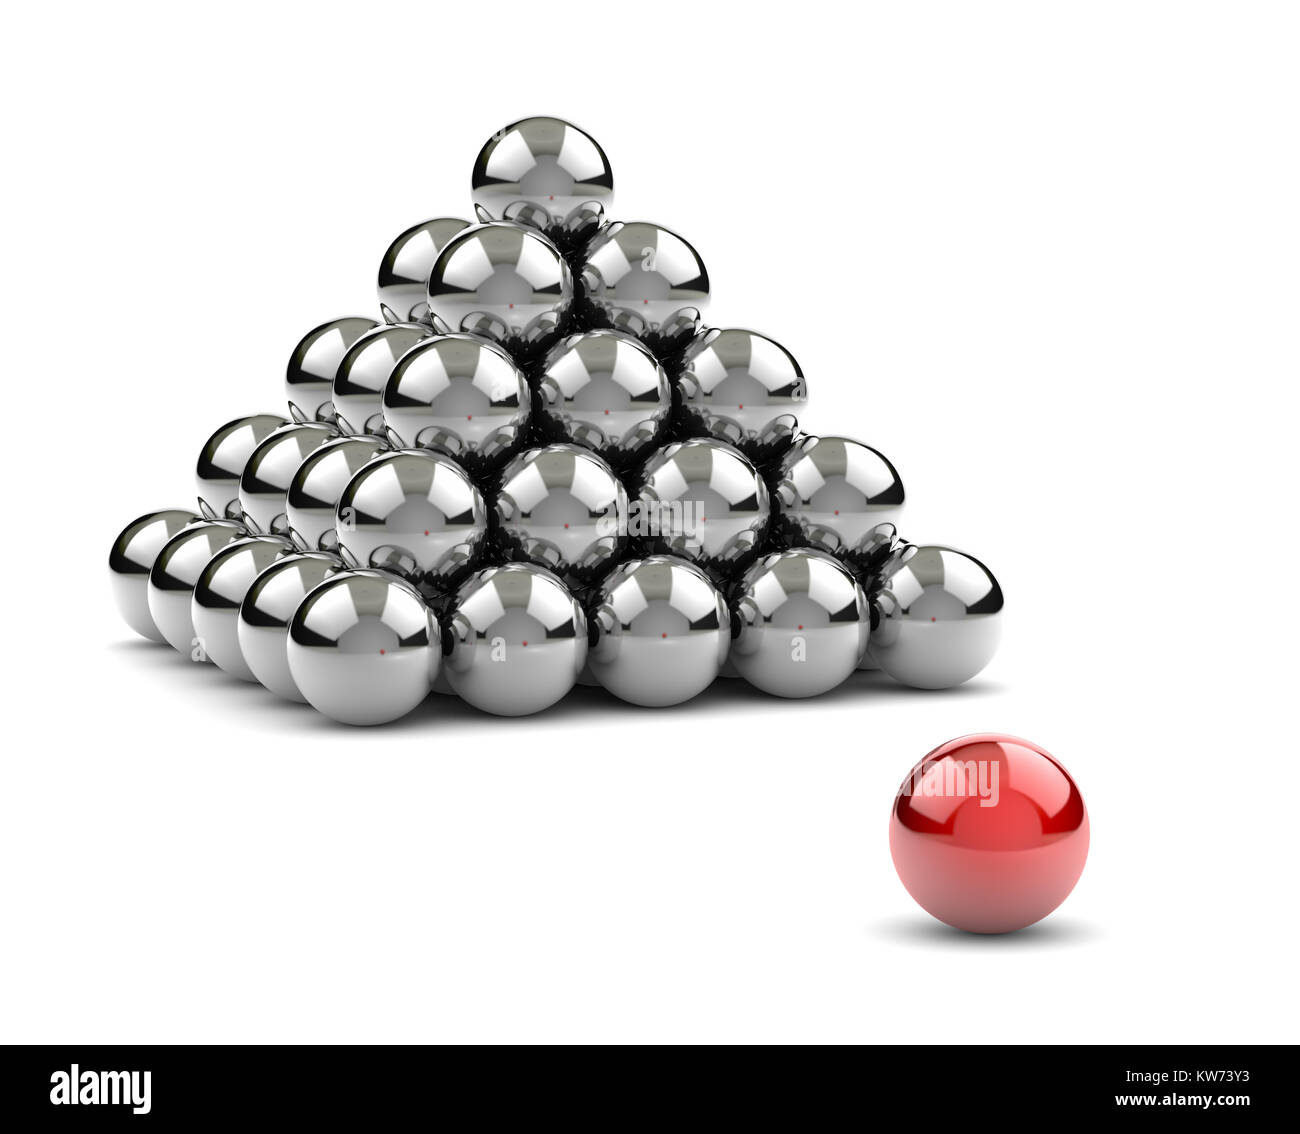 Pyramid of Metallic Balls with One Red Separated on White Background 3D Illustration Stock Photo